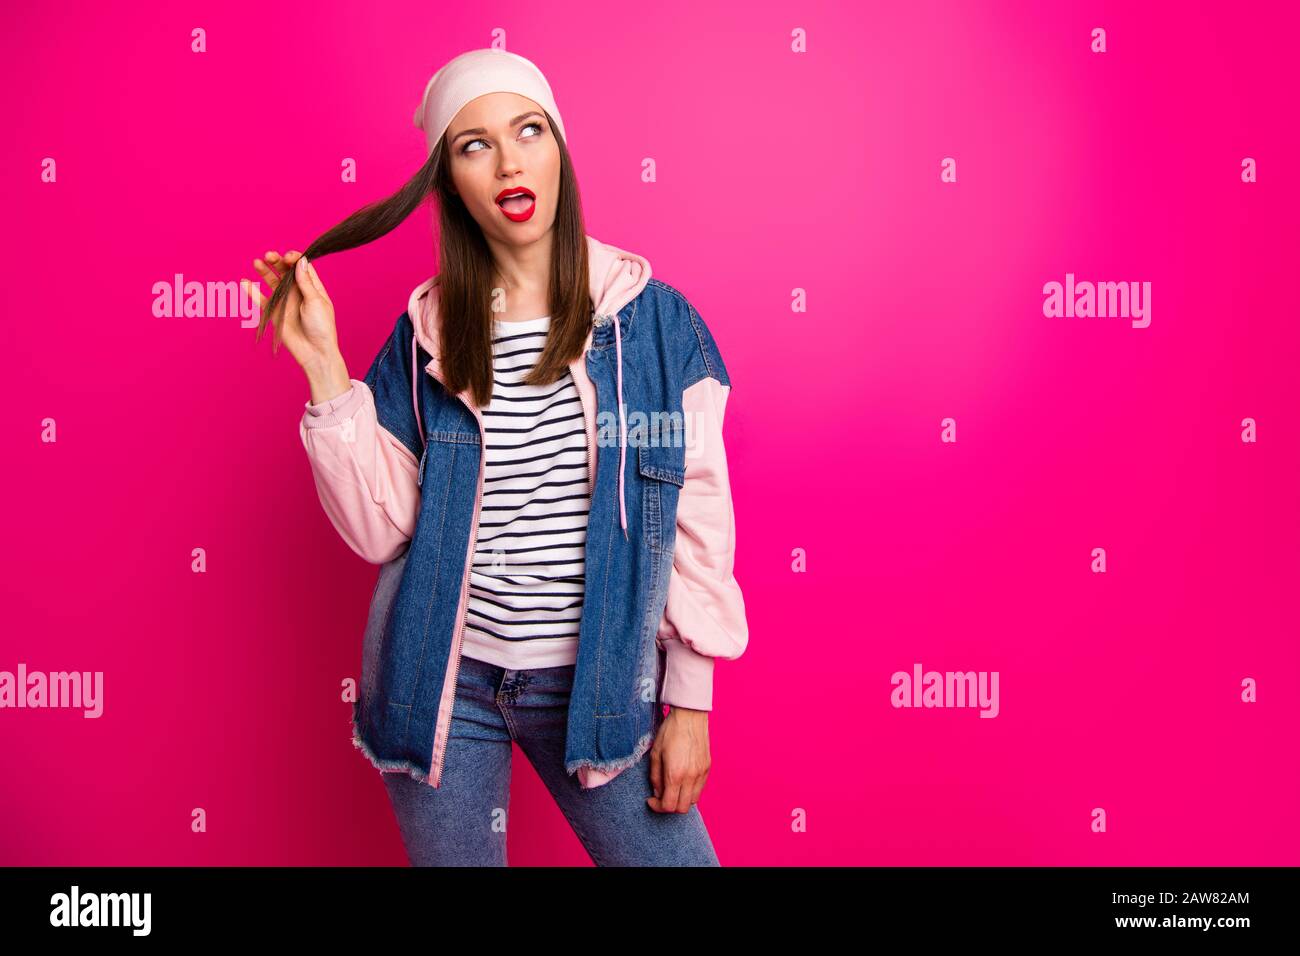 Portrait of her she nice attractive lovely girlish childish cheerful cheery girl wearing street style touching hair hairstyle isolated over bright Stock Photo